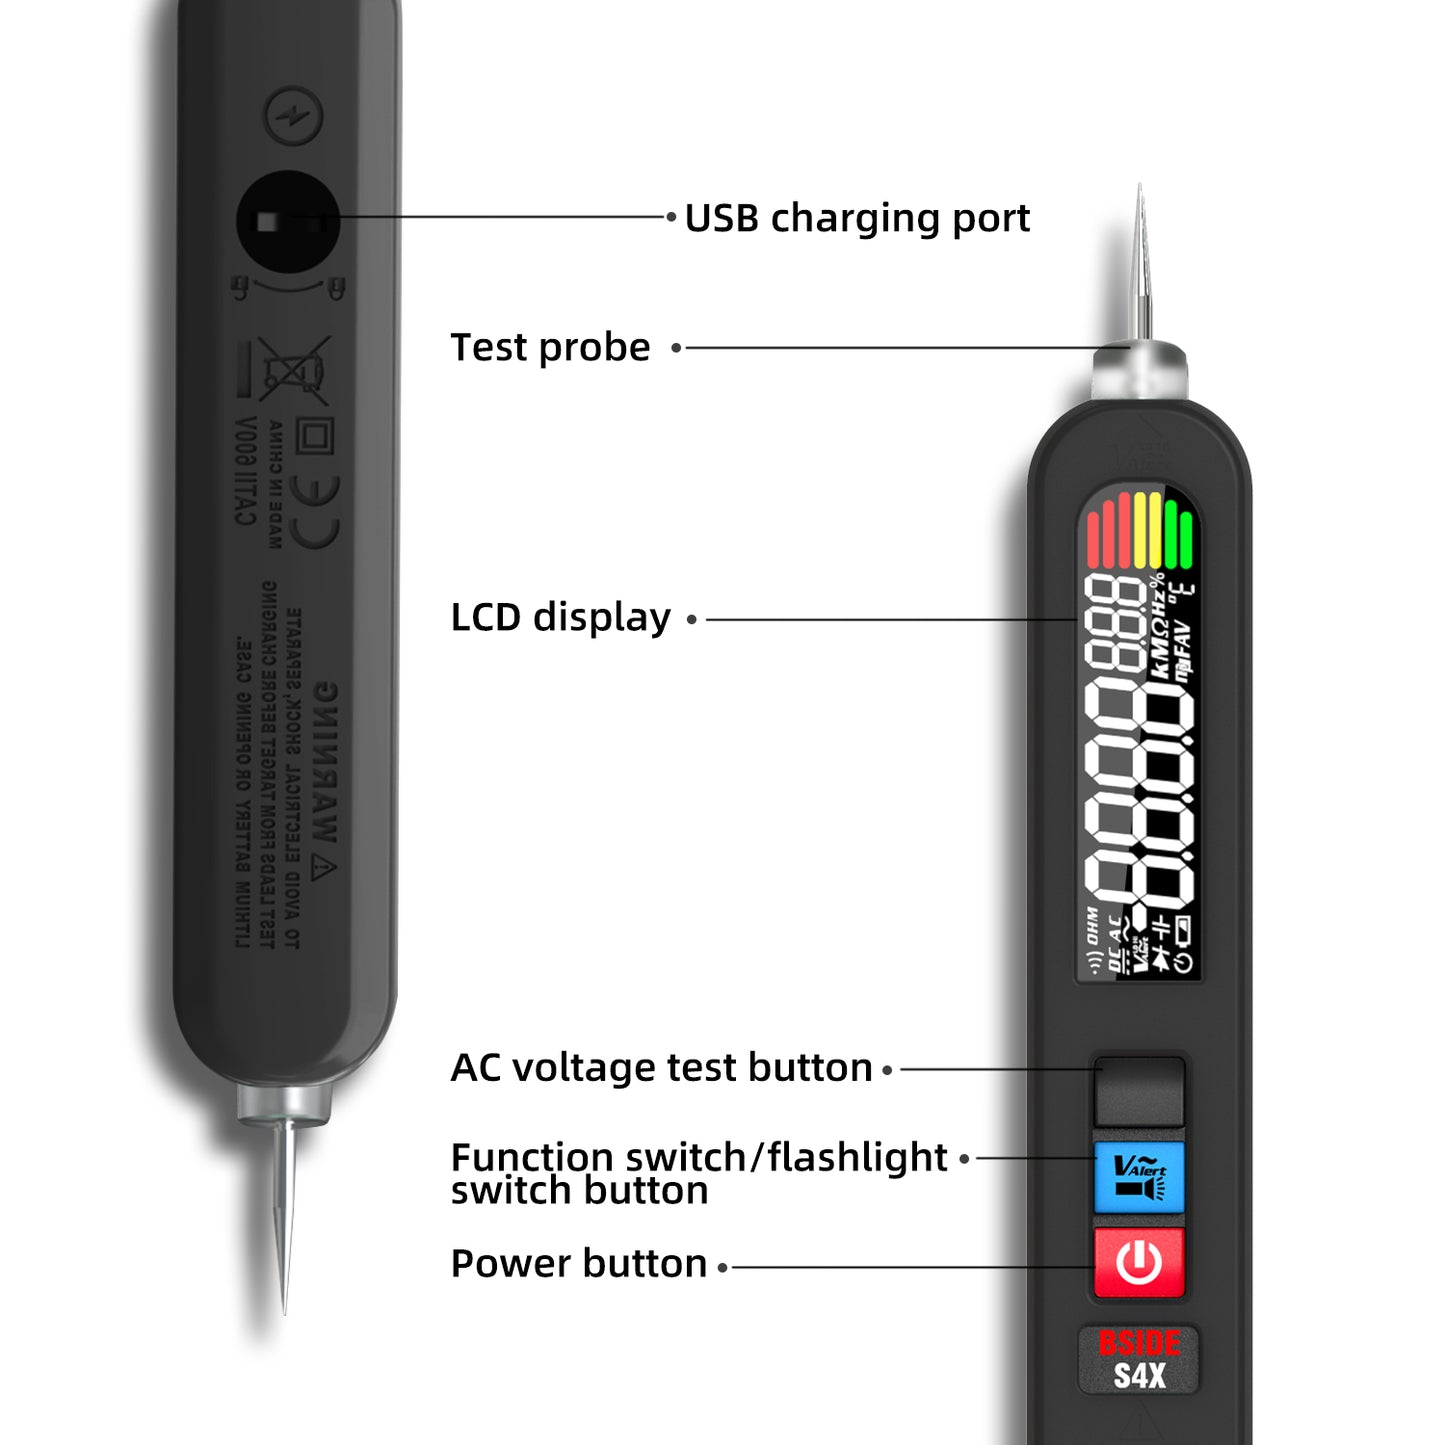 BSIDE Rechargeable Voltage Tester Pen Non-Contact Voltage Detector with Contacted Measure AC Voltage, Color LCD Environment Temperature Tester for Electrical Live Wire Check and Breakpoint Locate